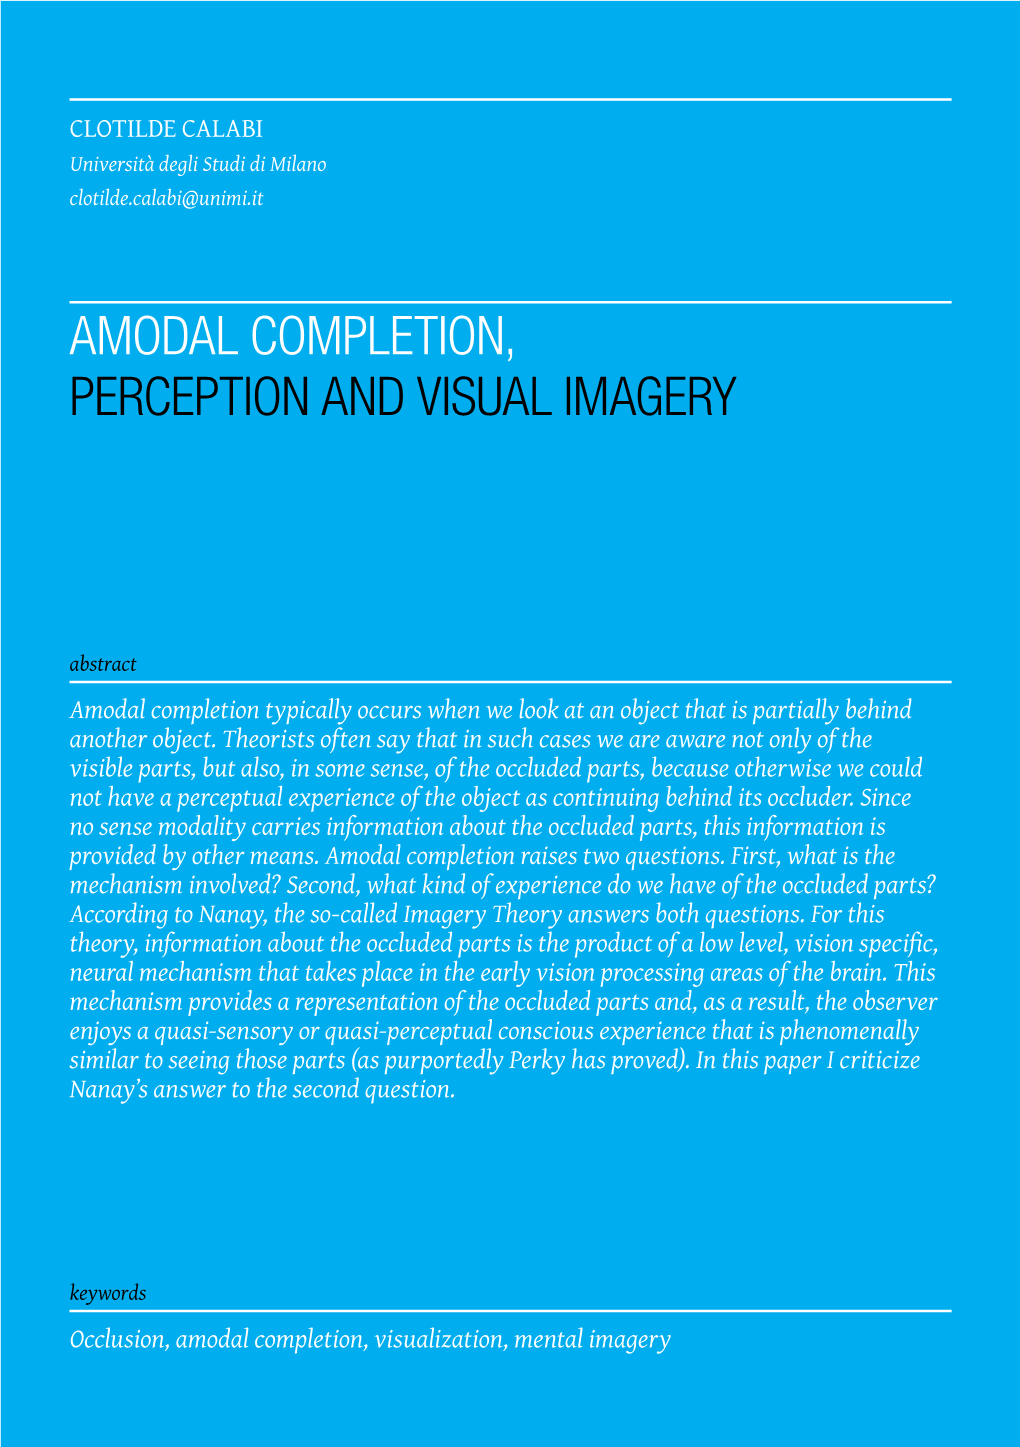 Amodal Completion, Perception and Visual Imagery